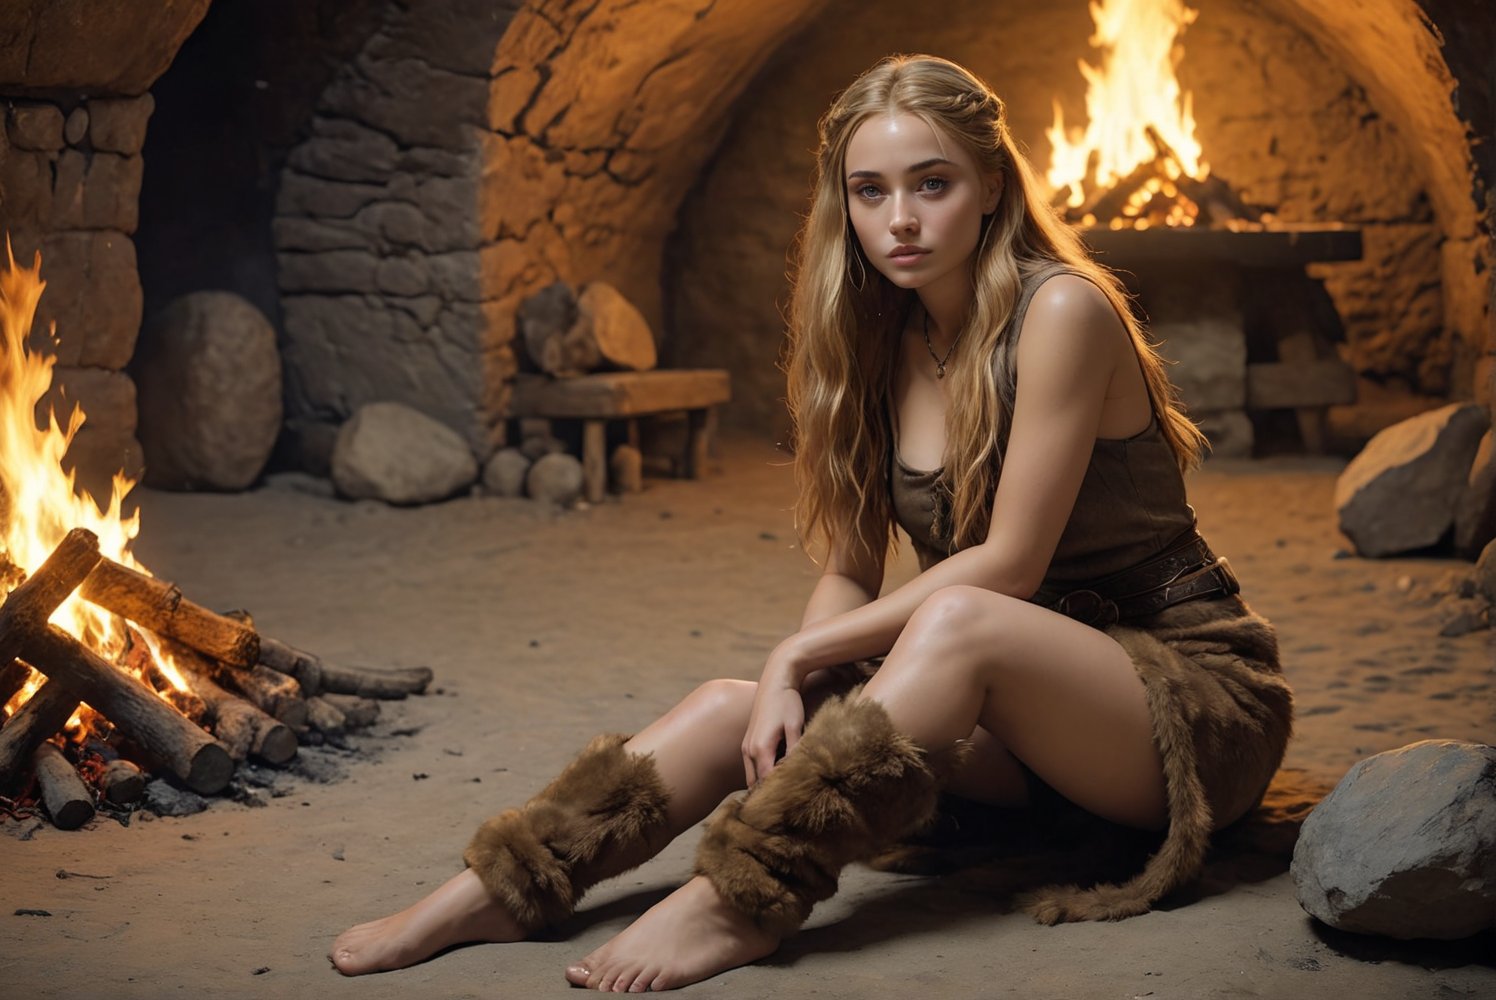 Cave in the Stone Age (hyperrealistic), campfire, Slavic girl, resemblance to Sophie Turner, blonde, sexy pose, open legs, full body, squatting in front of the fire, ((view of pussy, camel hooves)), caramel-colored skin, clothing animal fur with long shaggy hair, dreadlocks, wild unwashed, dirty, native tribe from the Stone Age, (((belly exposed))), round face, curved lips, yellow-brown eyes, big eyes, big pupils, large pelvis, medium-sized breasts, narrow waist, healthy thighs, height 175 cm, 23 years old, alone, fawn hair, full body, realistic, better photography, (((background stone age people ))), focus on background,digital artwork by Beksinski,nodf_xl